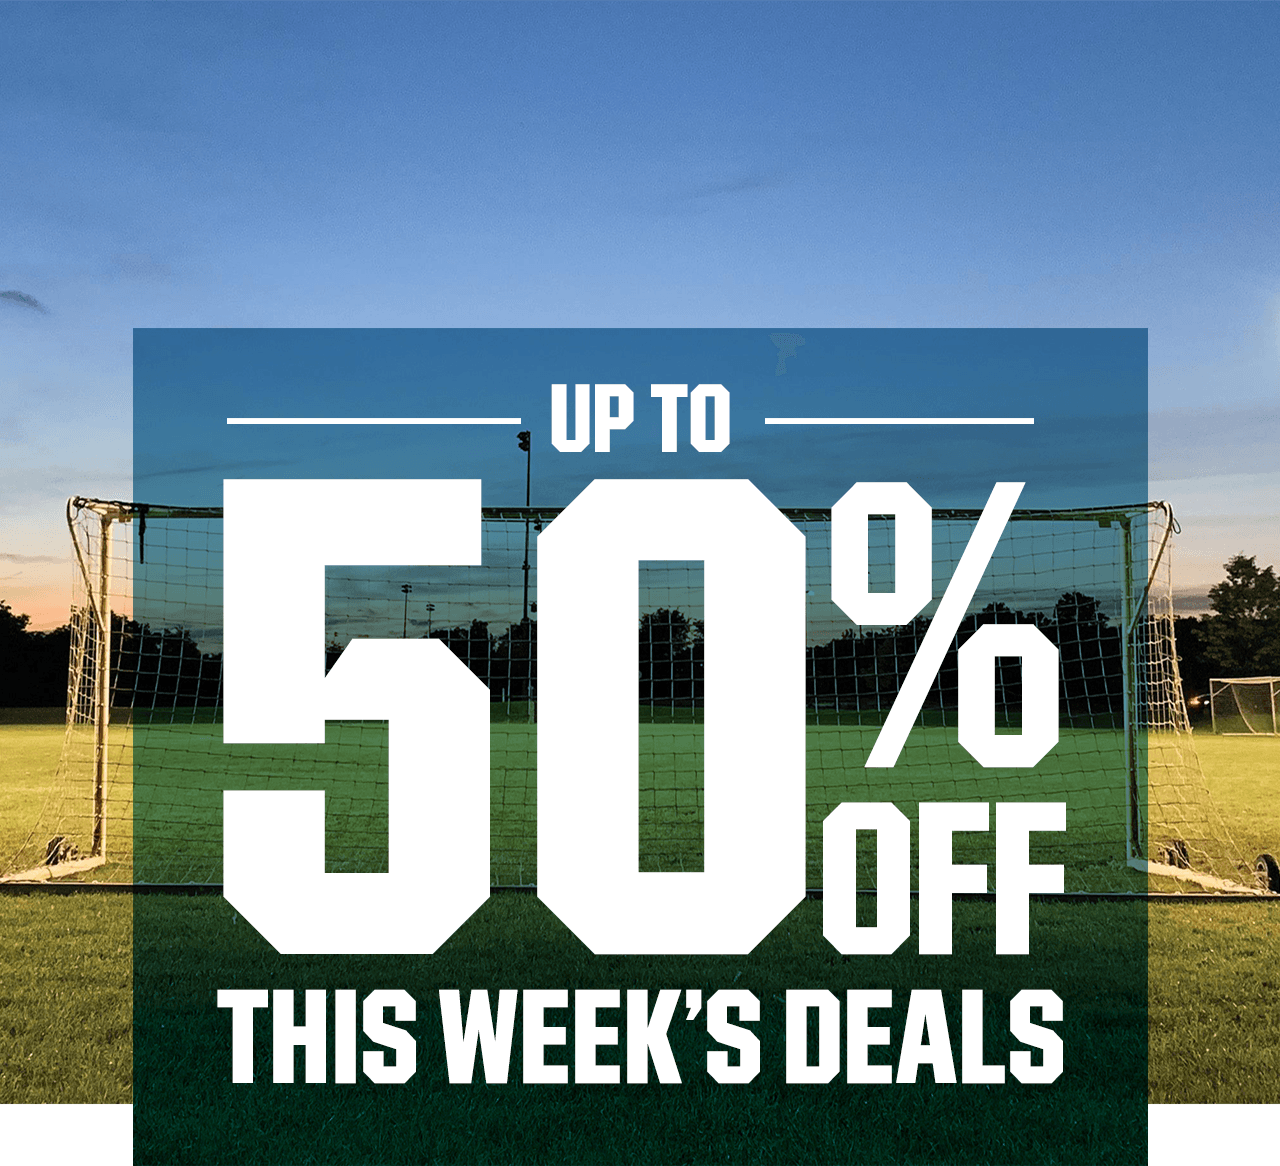 Up to 50% off. This week's deals.